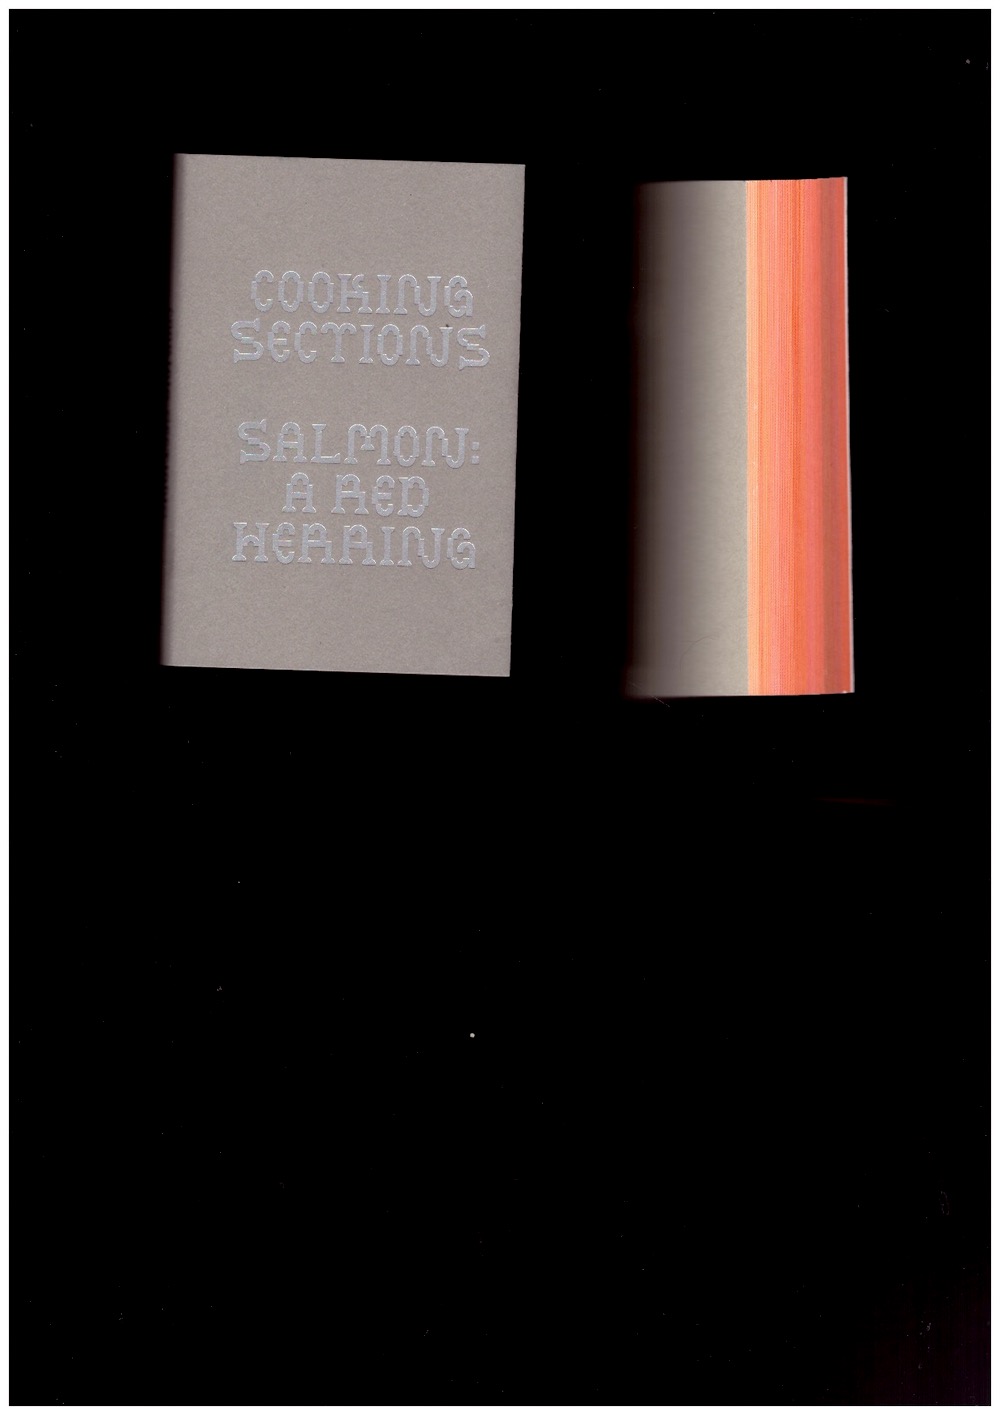 COOKING SECTIONS - Salmon: A Red Herring